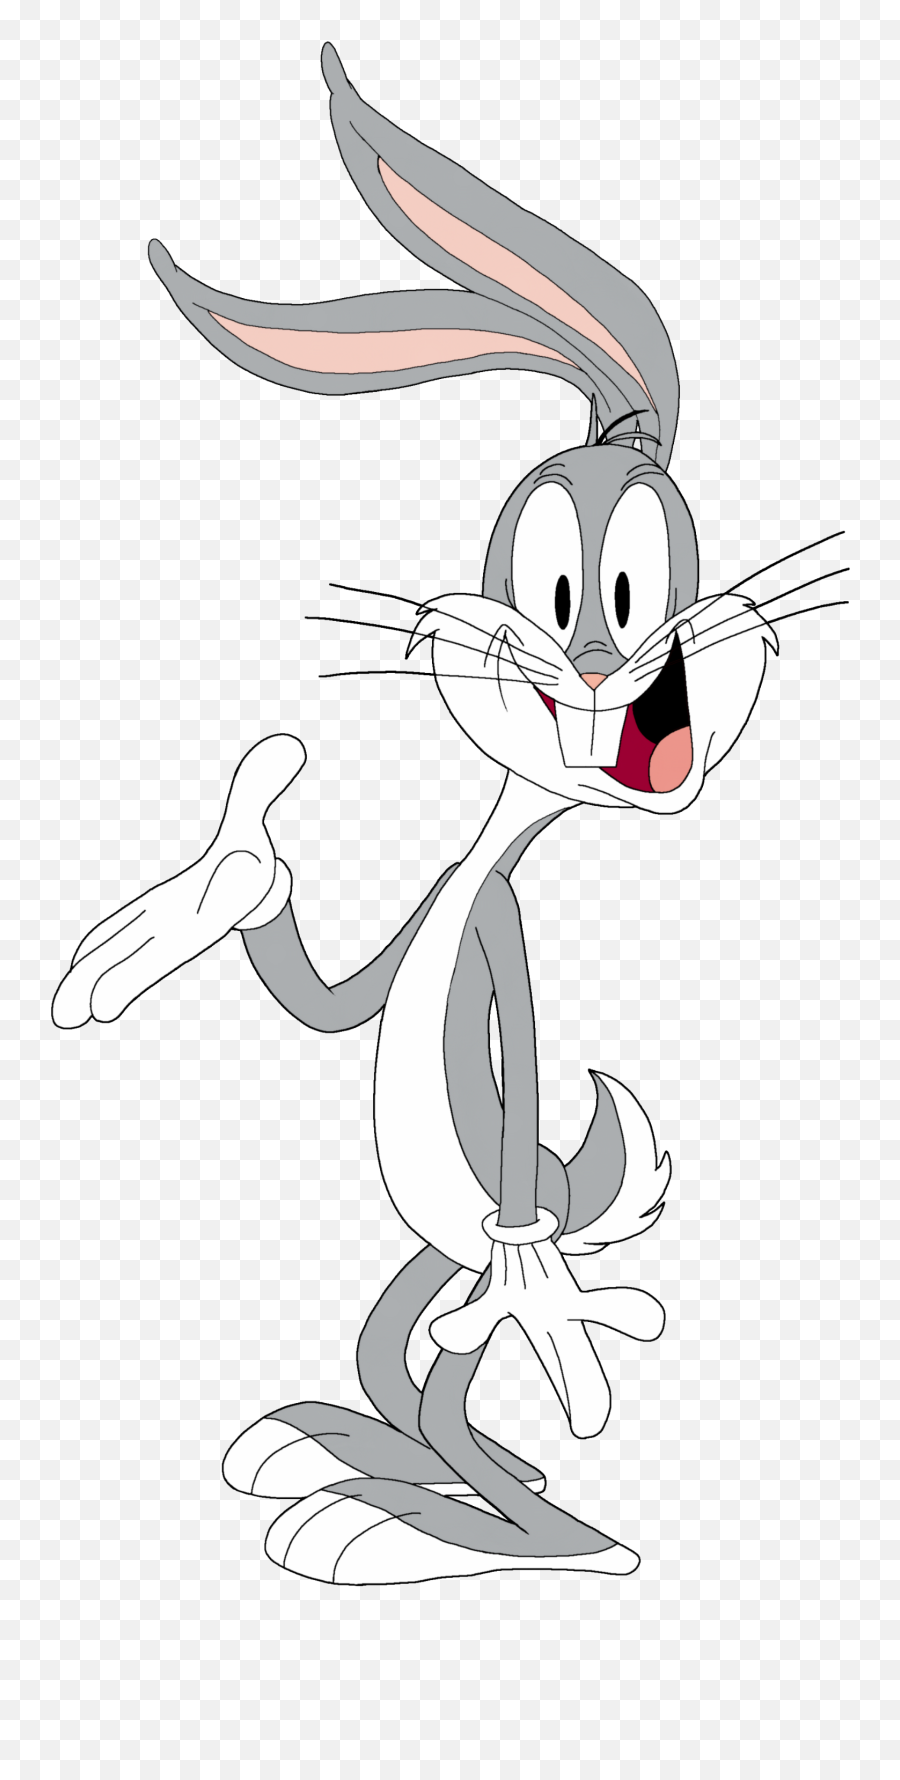 Bugs Bunny Png For Computer U0026 Free - Bugs Bunny Parody Wiki Sonic,Porky Pig Png